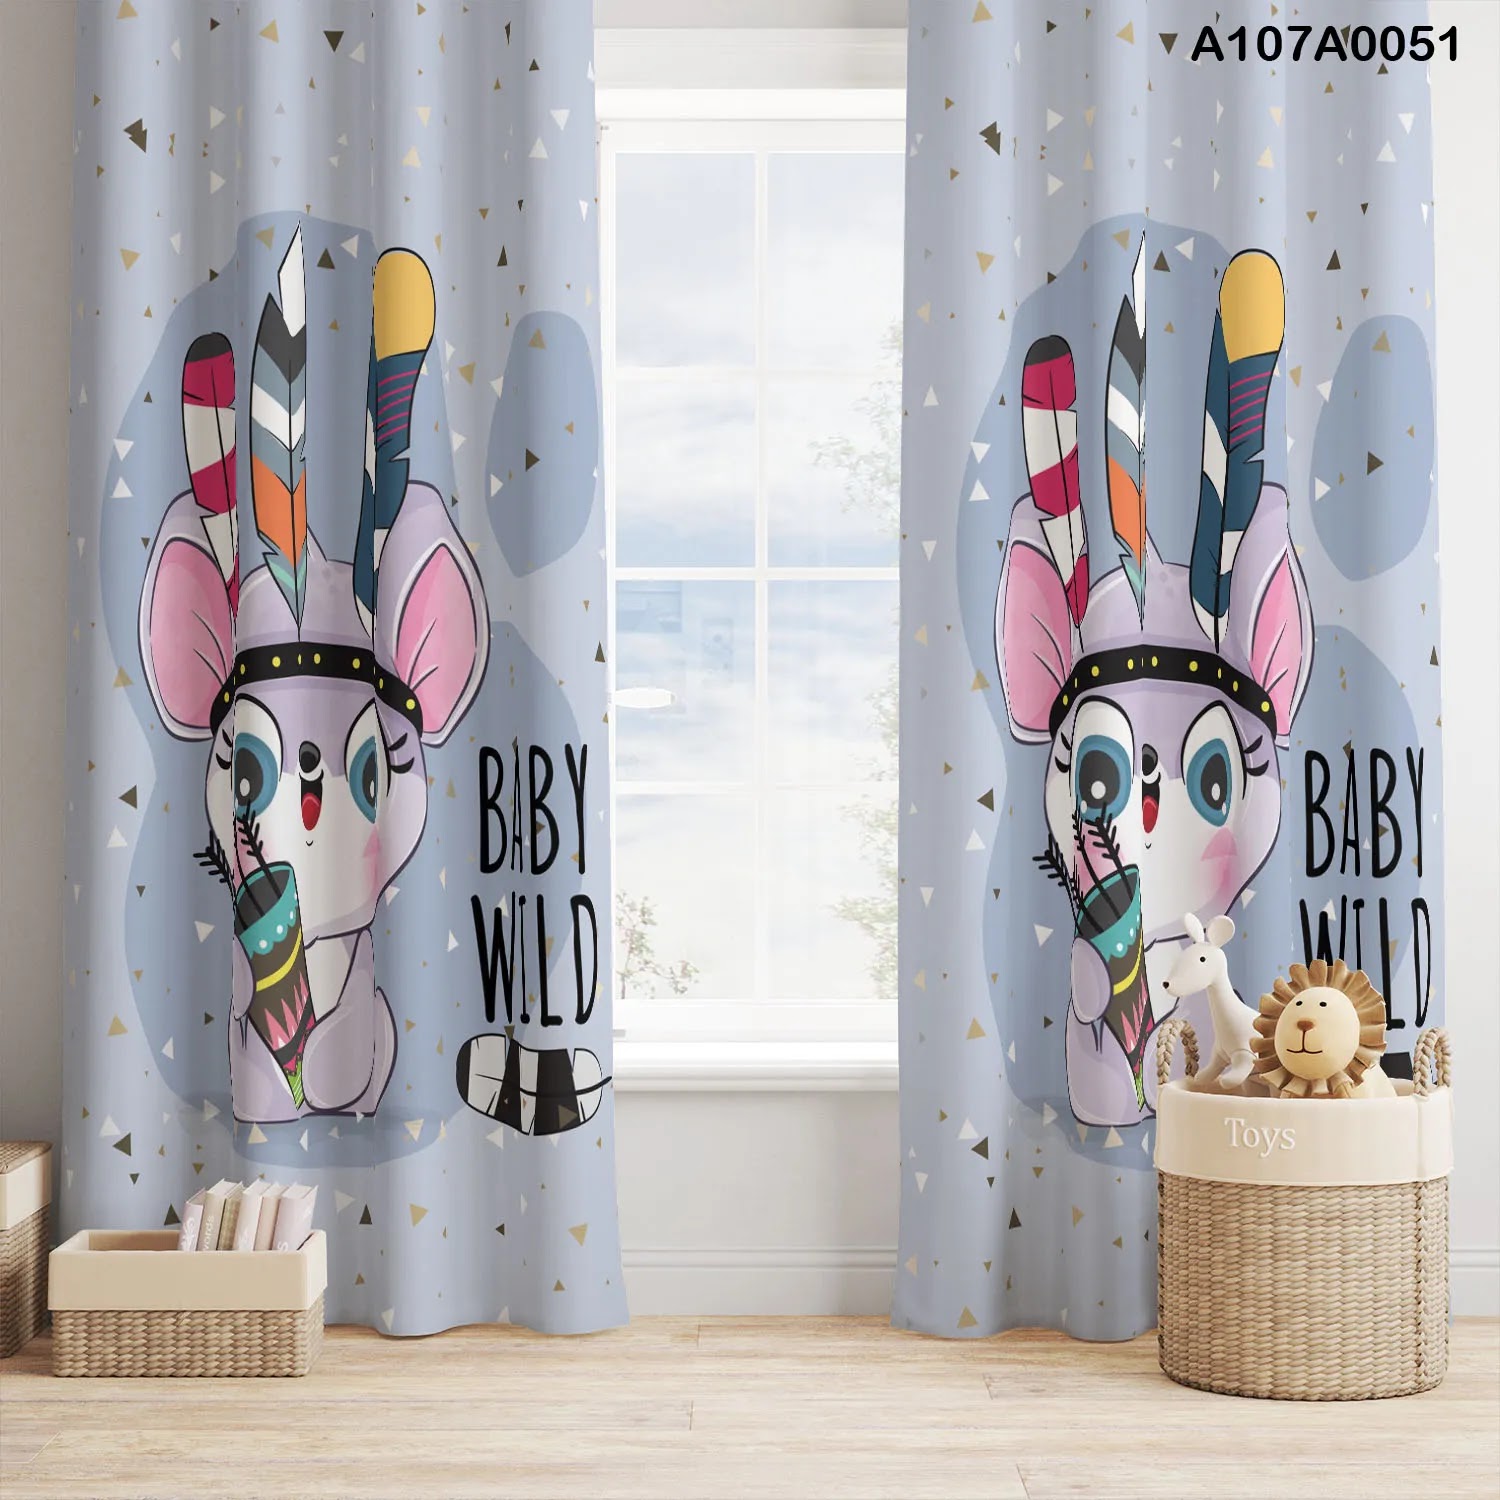 Gray Baby wild curtains for children room